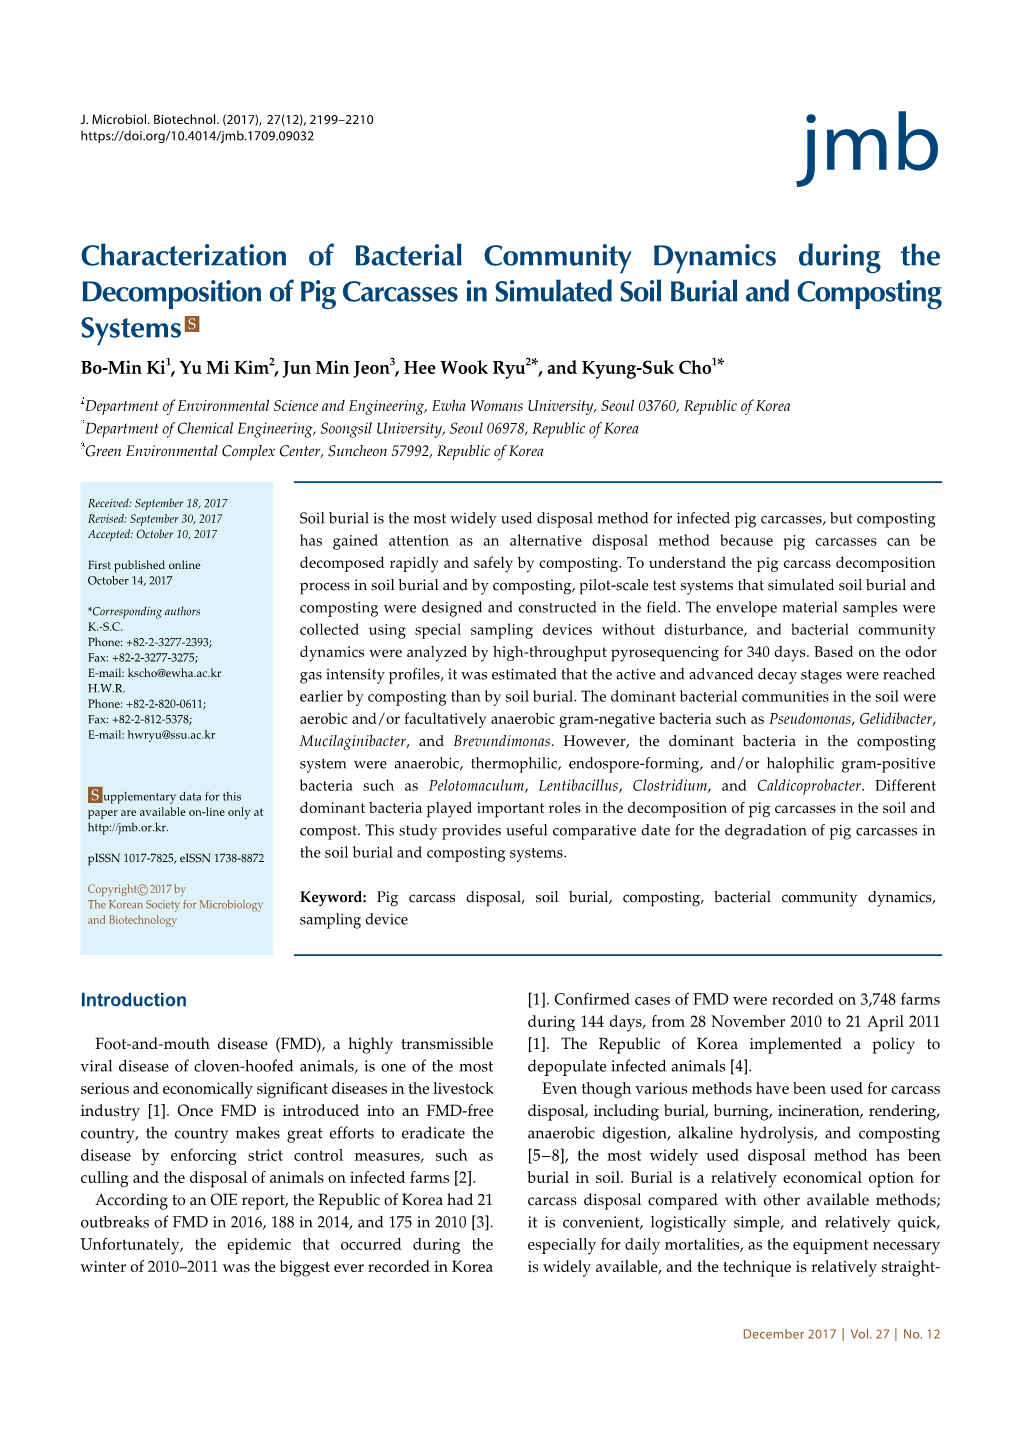 Characterization of Bacterial Community Dynamics During the Decomposition of Pig Carcasses in Simulated Soil Burial and Composti